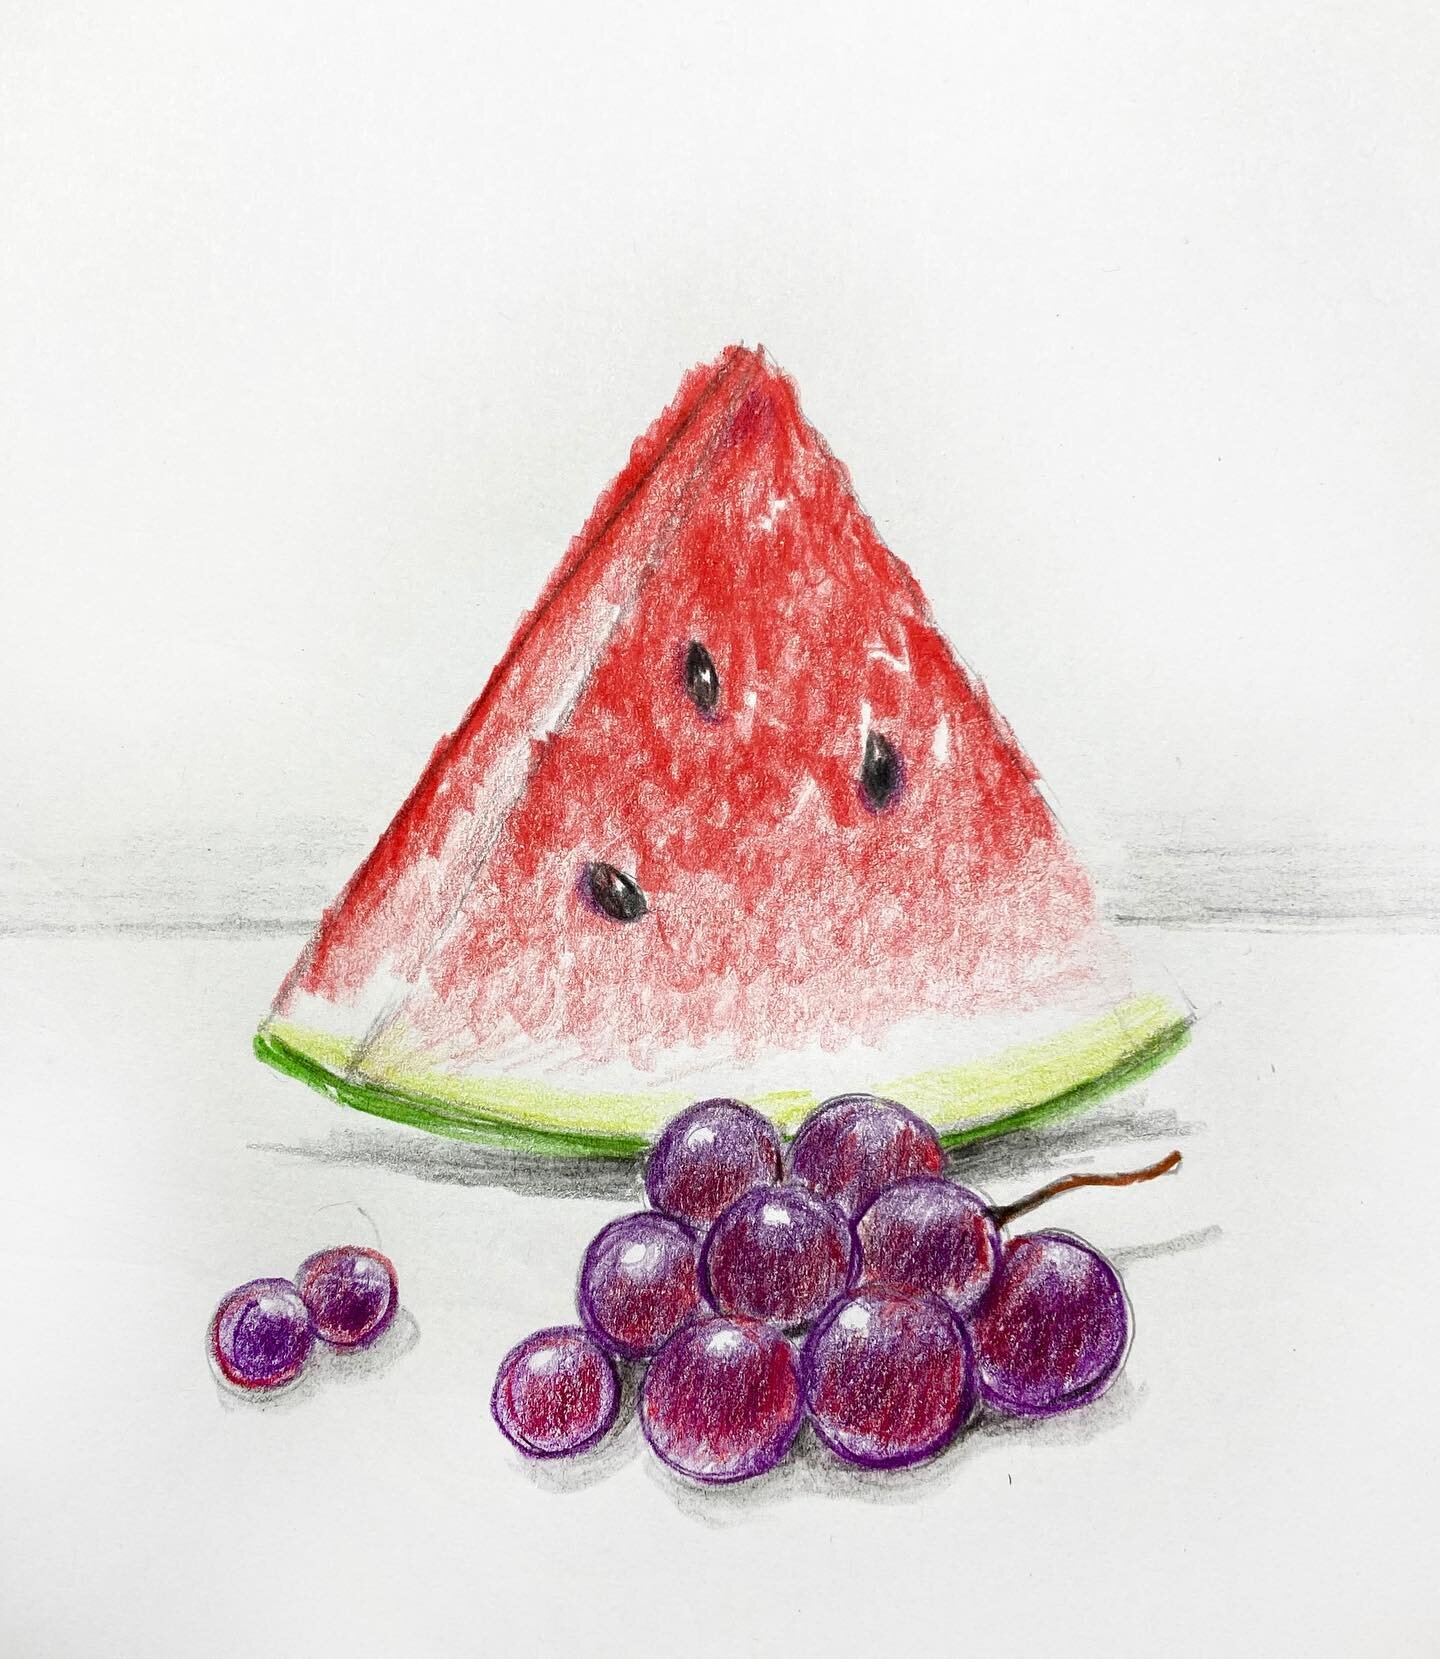 This is the colored pencil artwork Watermelon showed to our colored pencil students! Message us if you are interested in taking colored pencil class with us!! 😀😀😀😀
#charlotteartstudio  #parents #art #fineart #creativity #arteducation #elementarya